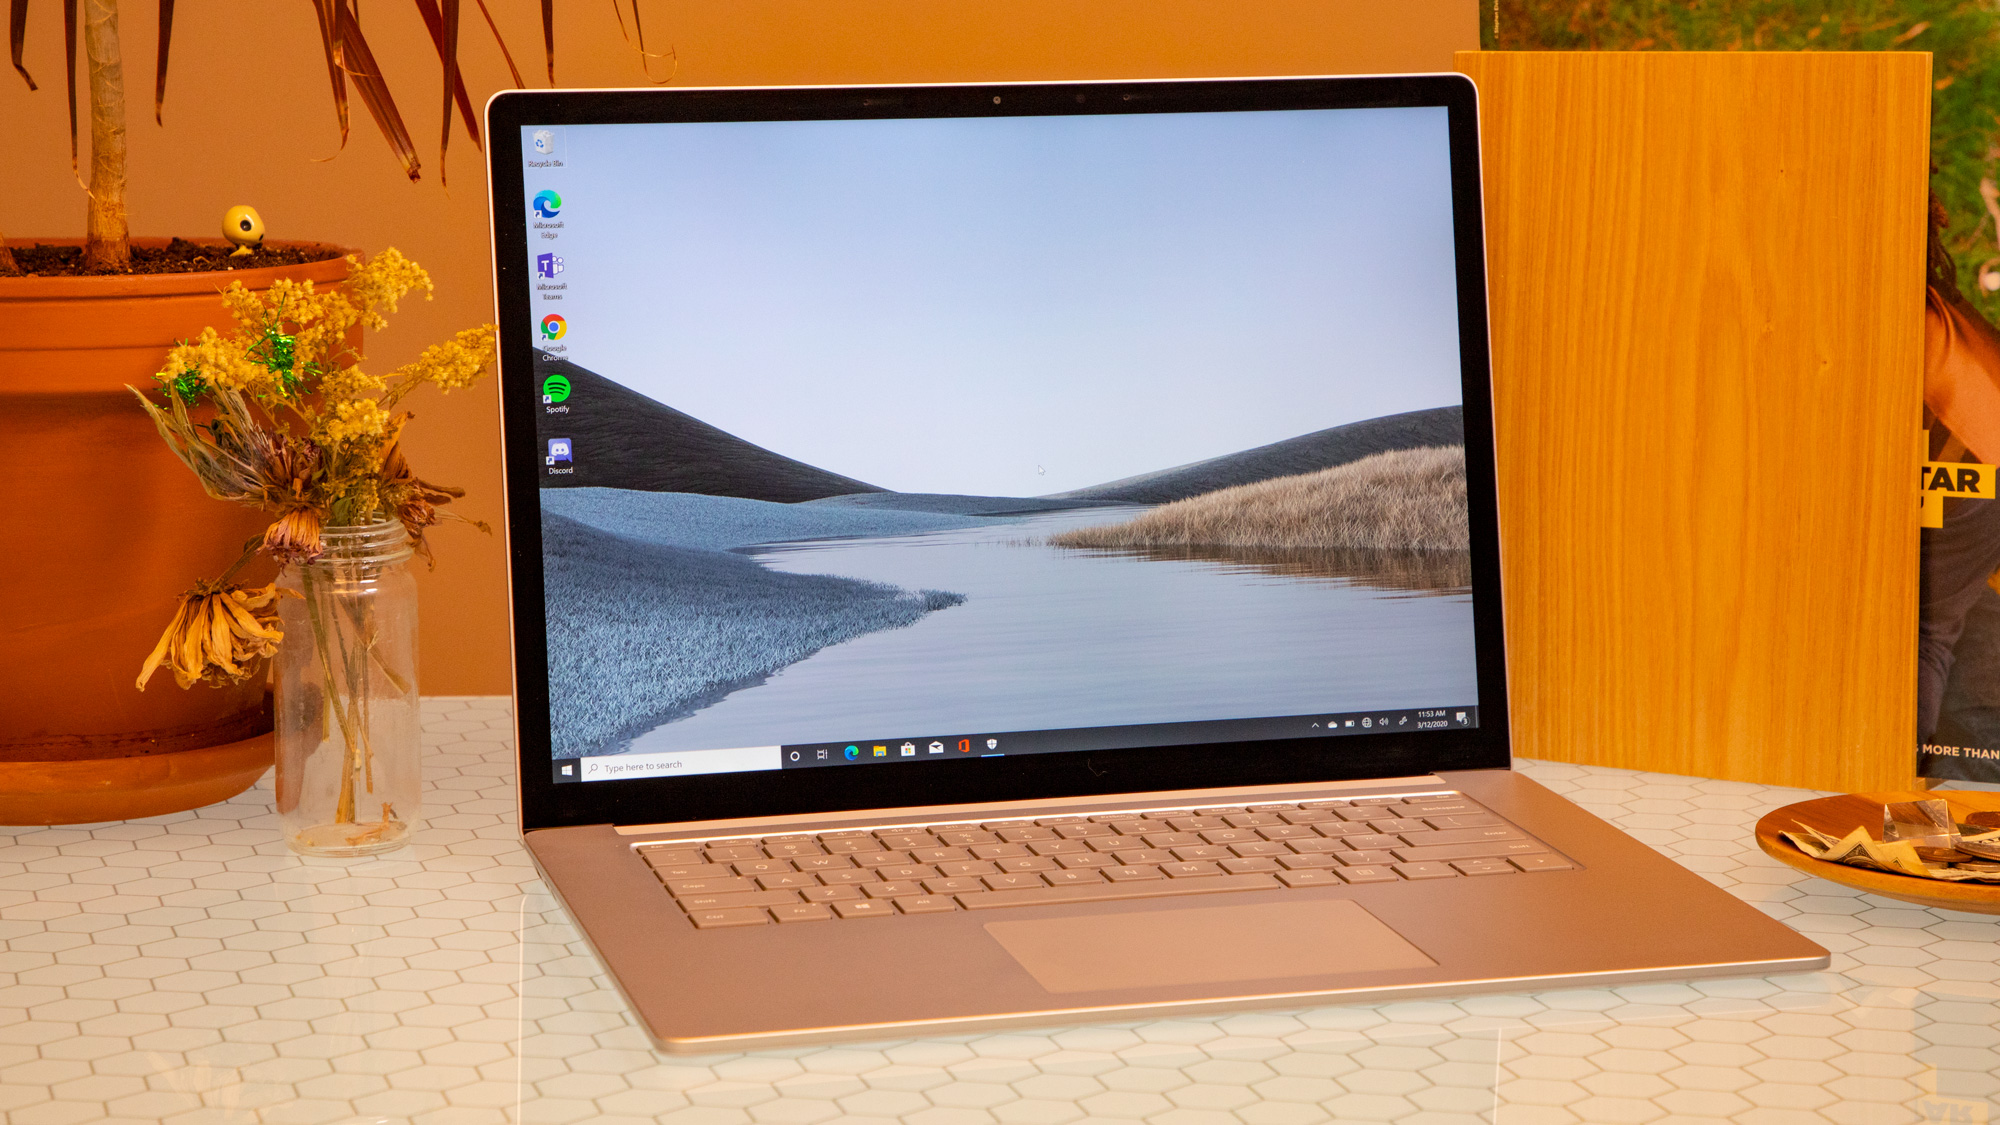 Microsoft Surface Laptop ‘Sparti’ Launch In India Price, Specification